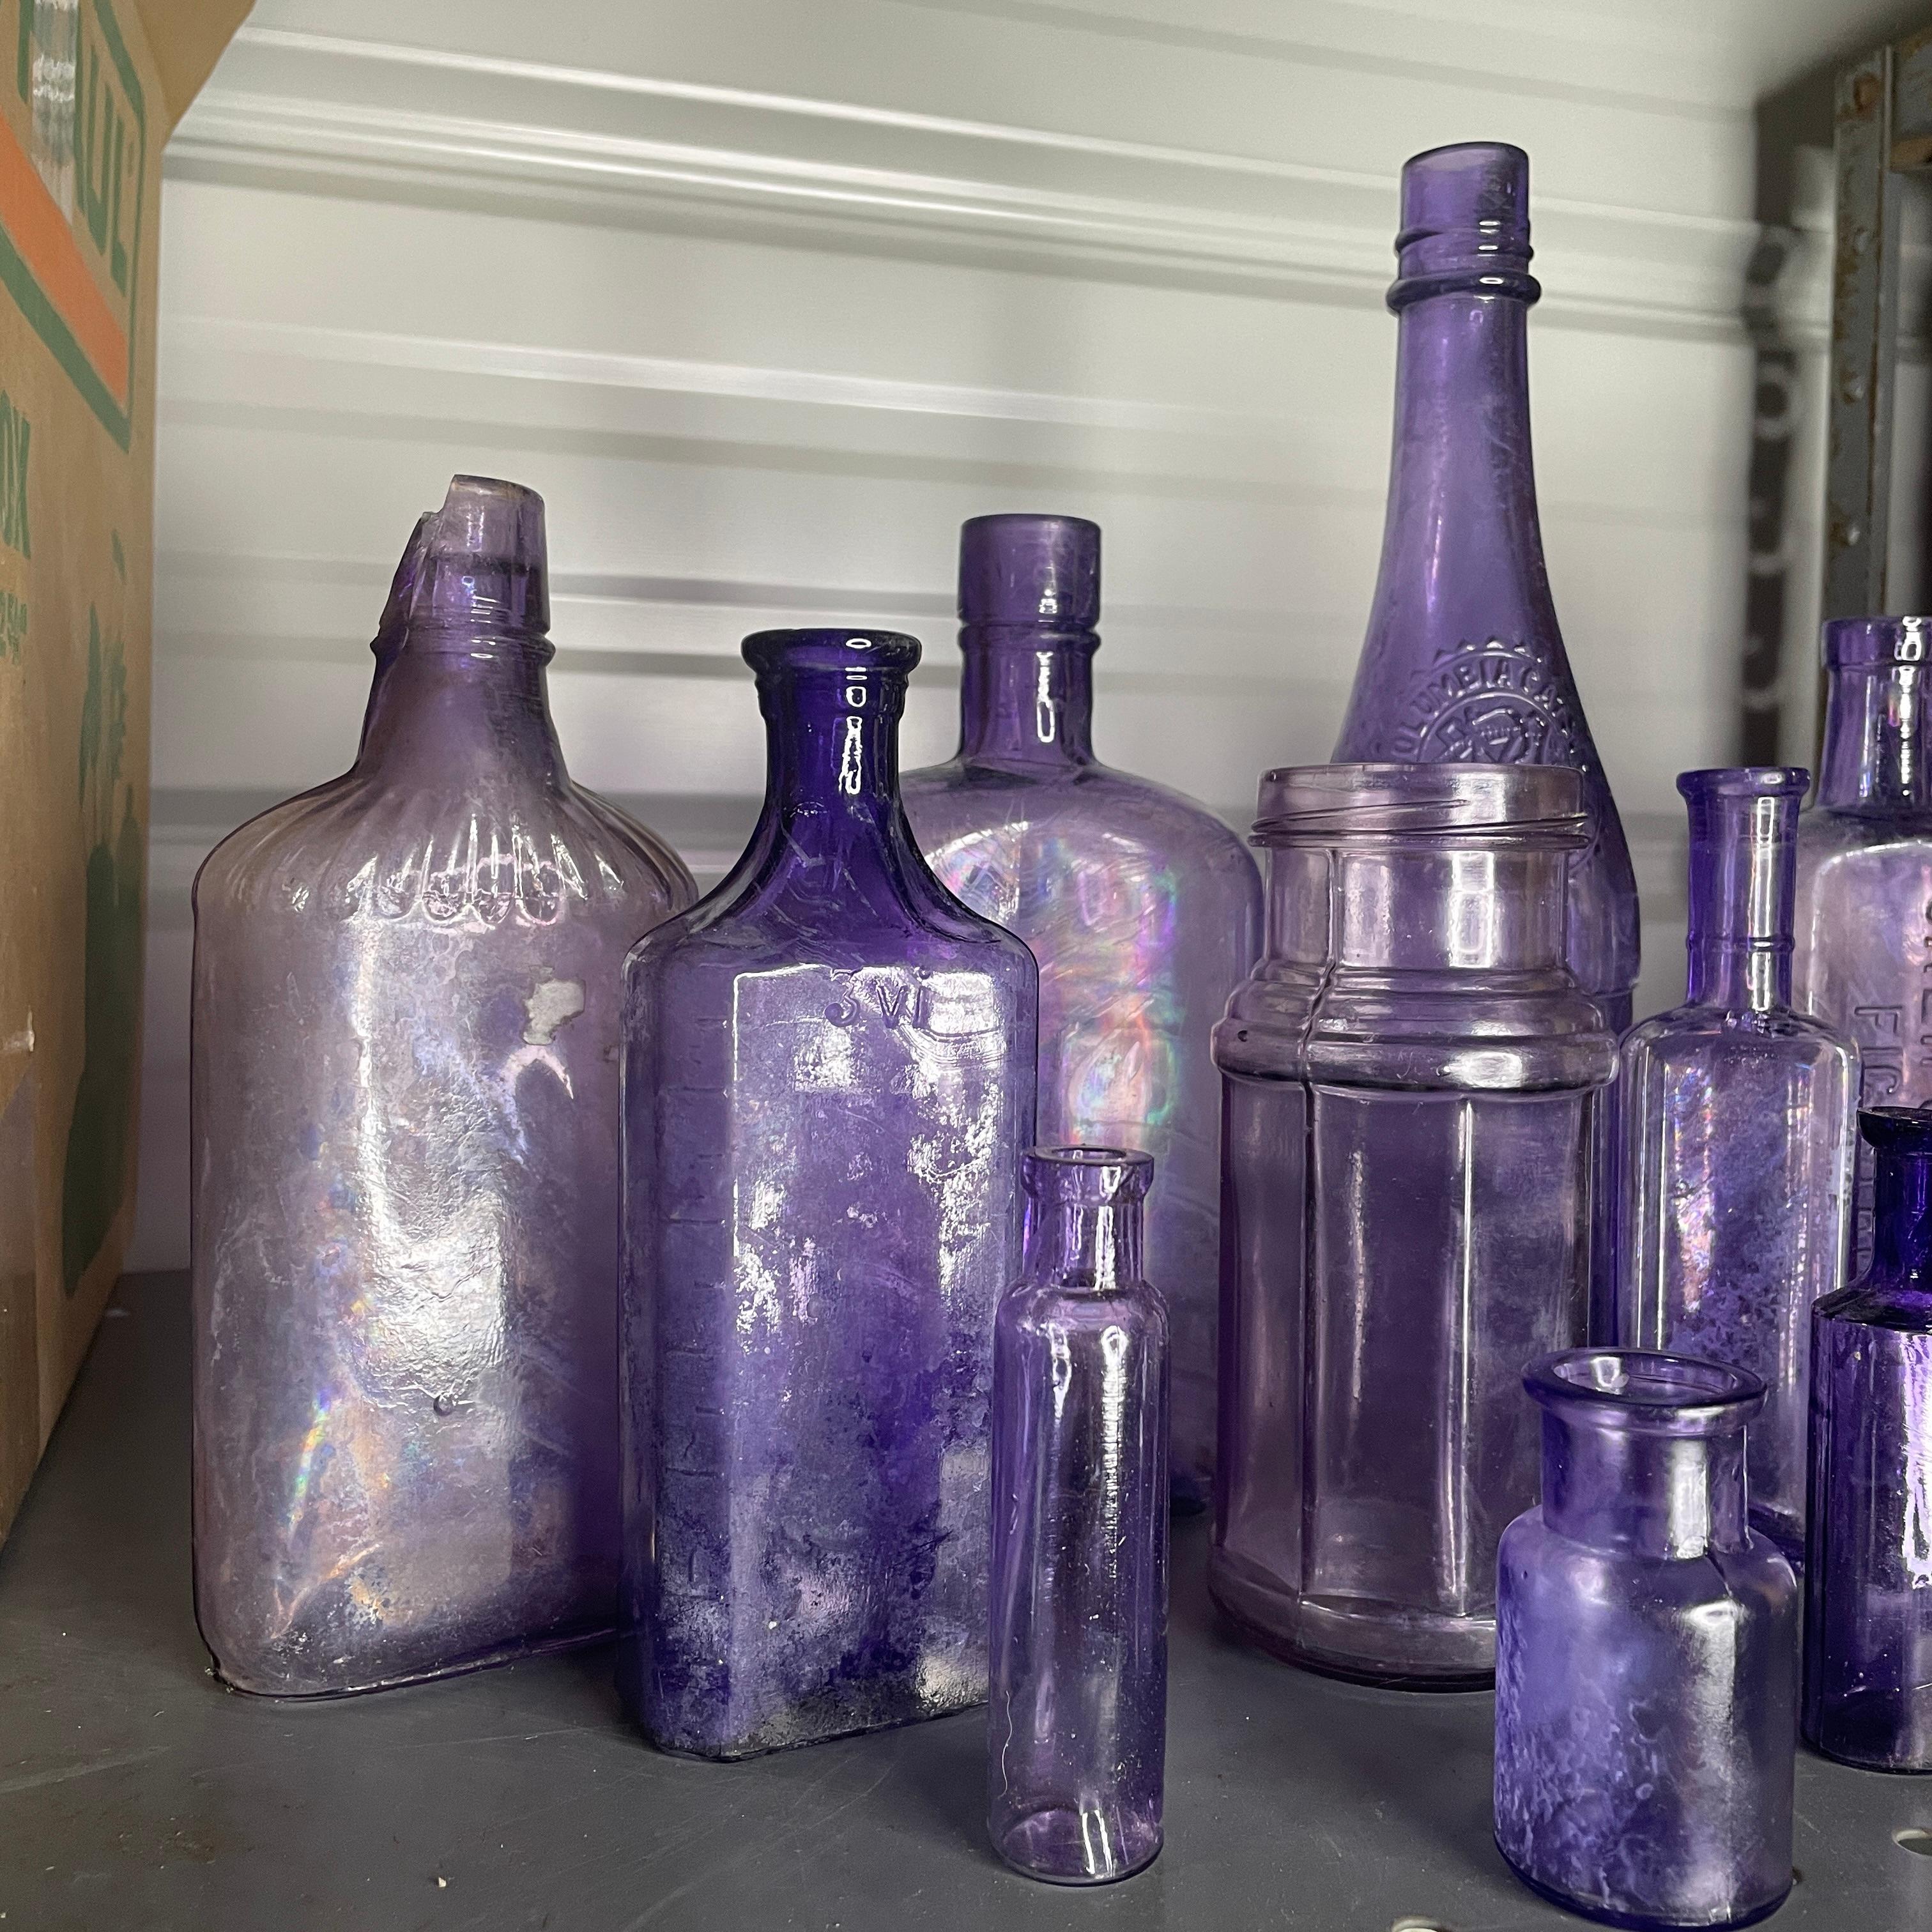 This large collection of antique purple glass bottles is great for starting or adding to your bottle collection. A lot of these bottles were originally clear glass, but the glass can change color if placed into sand for a period of time. Some pieces